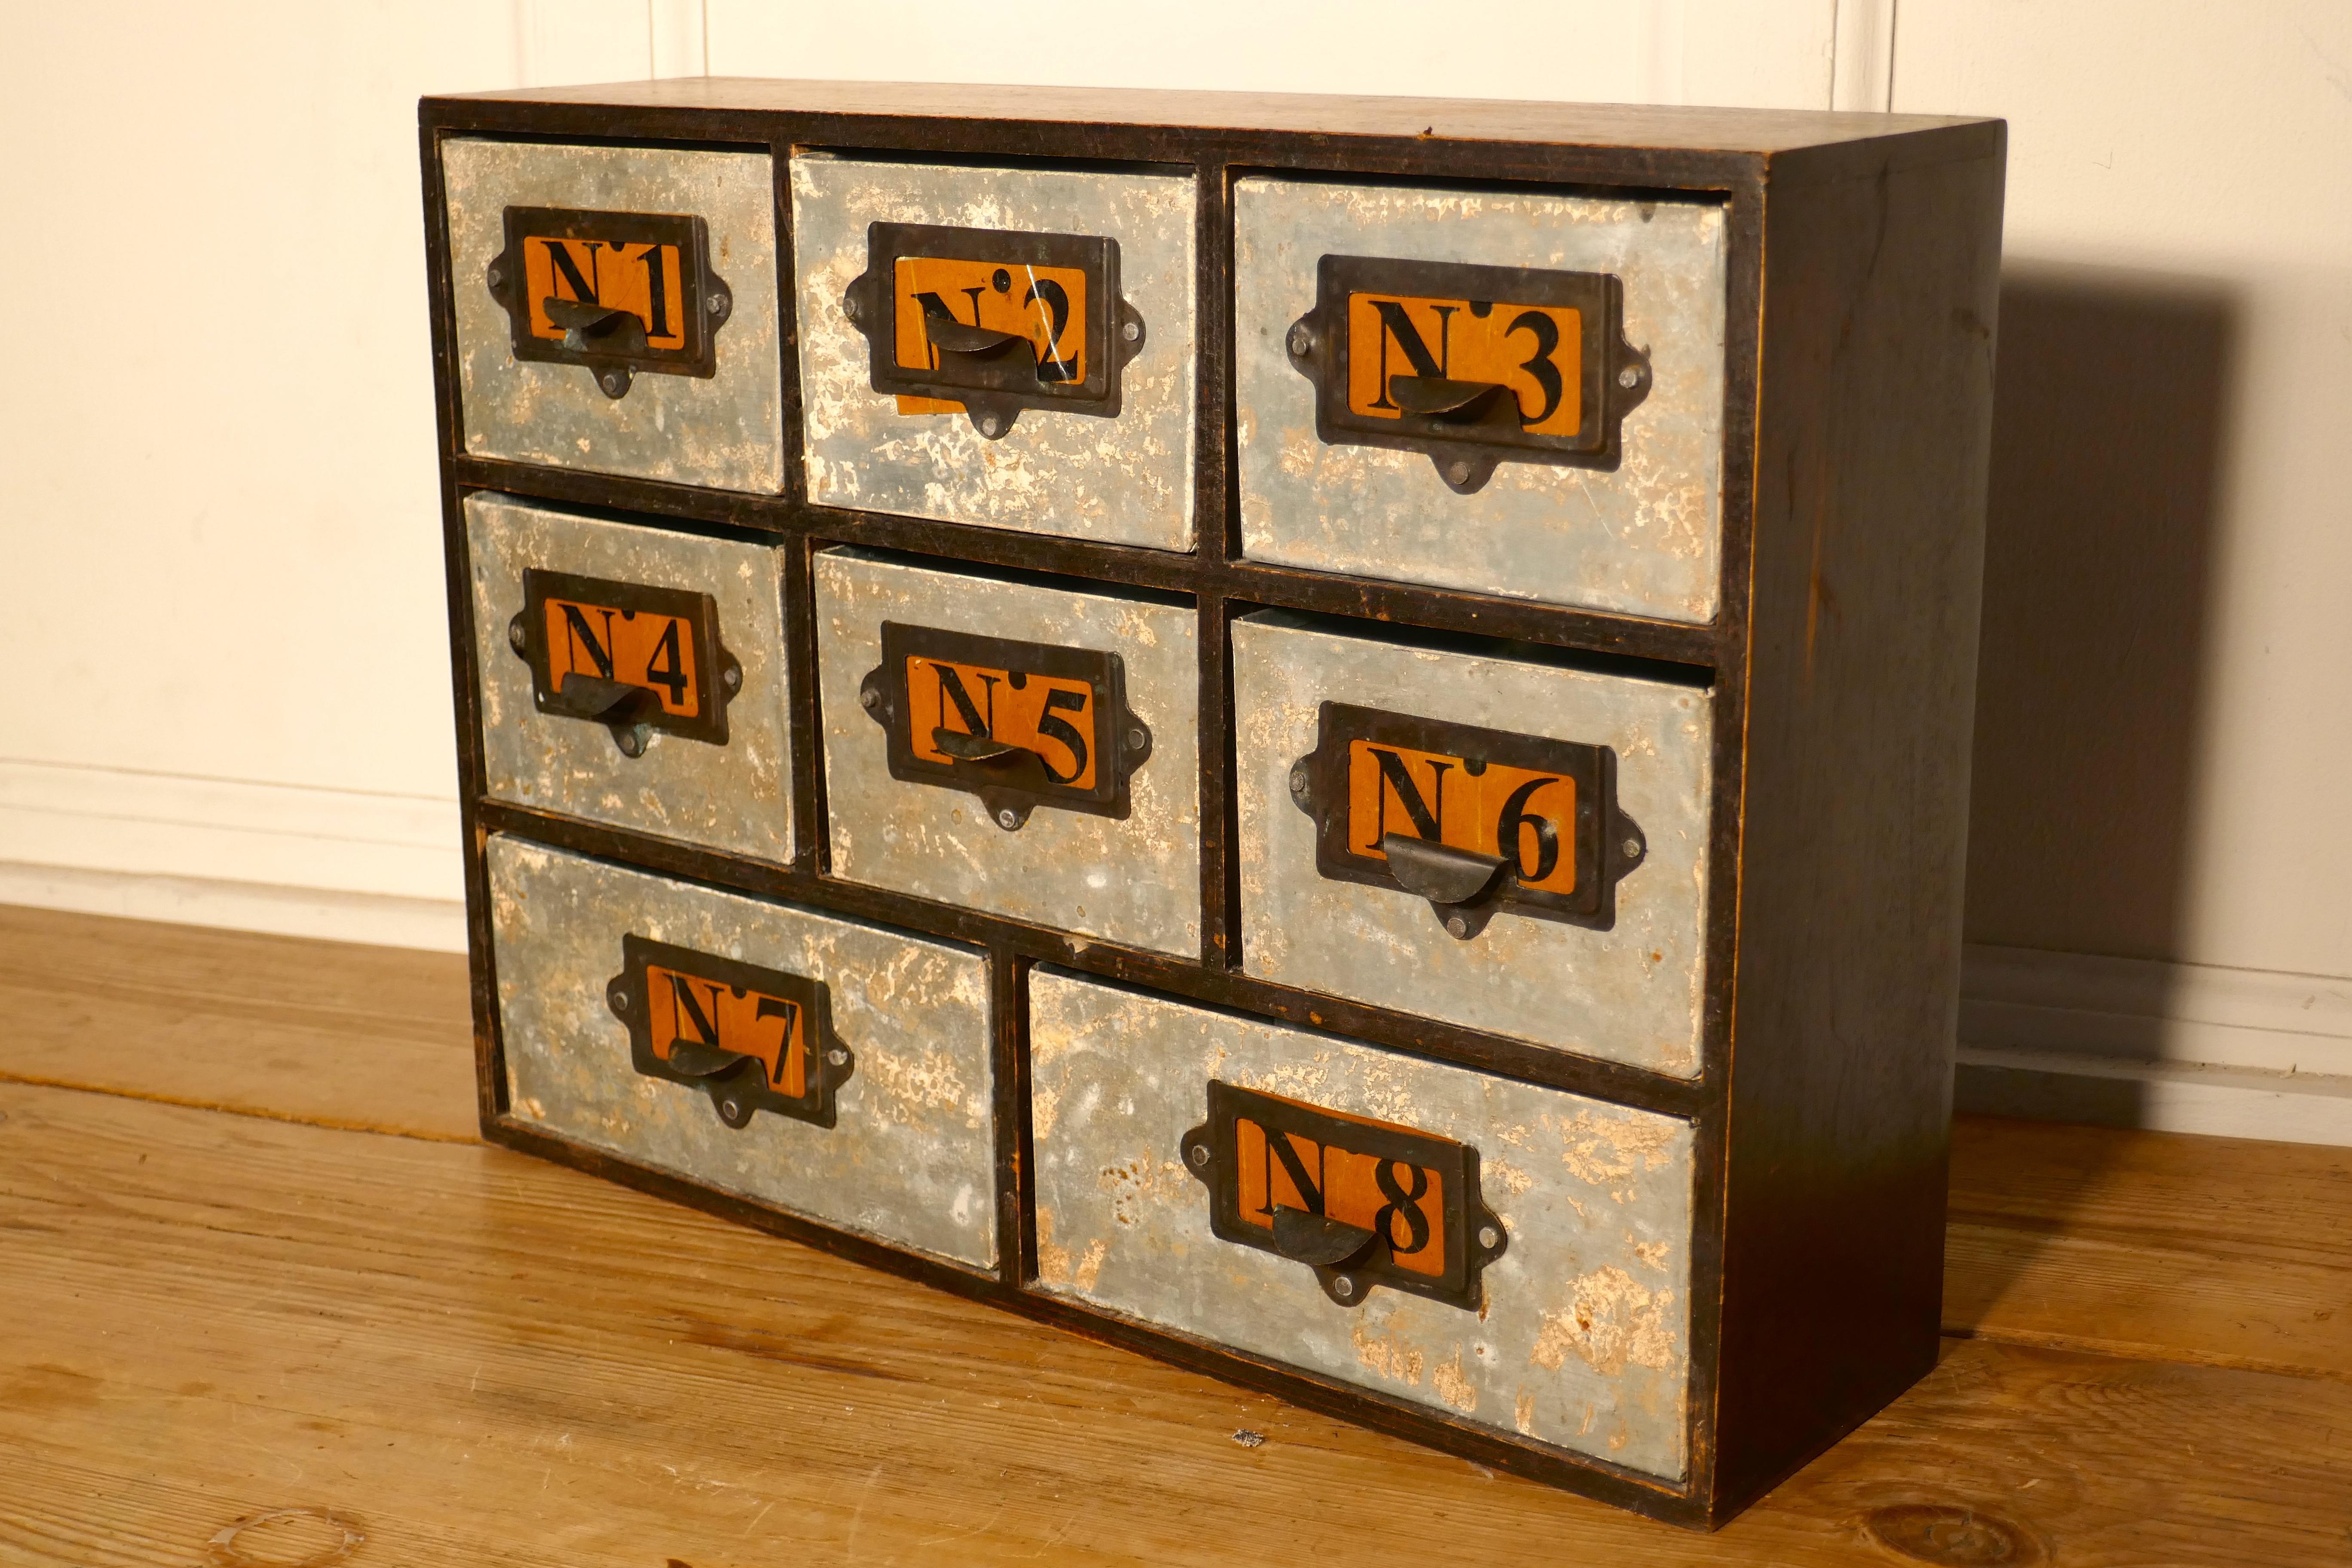 Industrial collectors organiser drawers

I useful piece, this 8 drawers chest has metal drawers set into a pine cabinet, the drawers are numbered 1-8, the labels are paper, these are set into a combined label holder/handle
The little chest is 18”